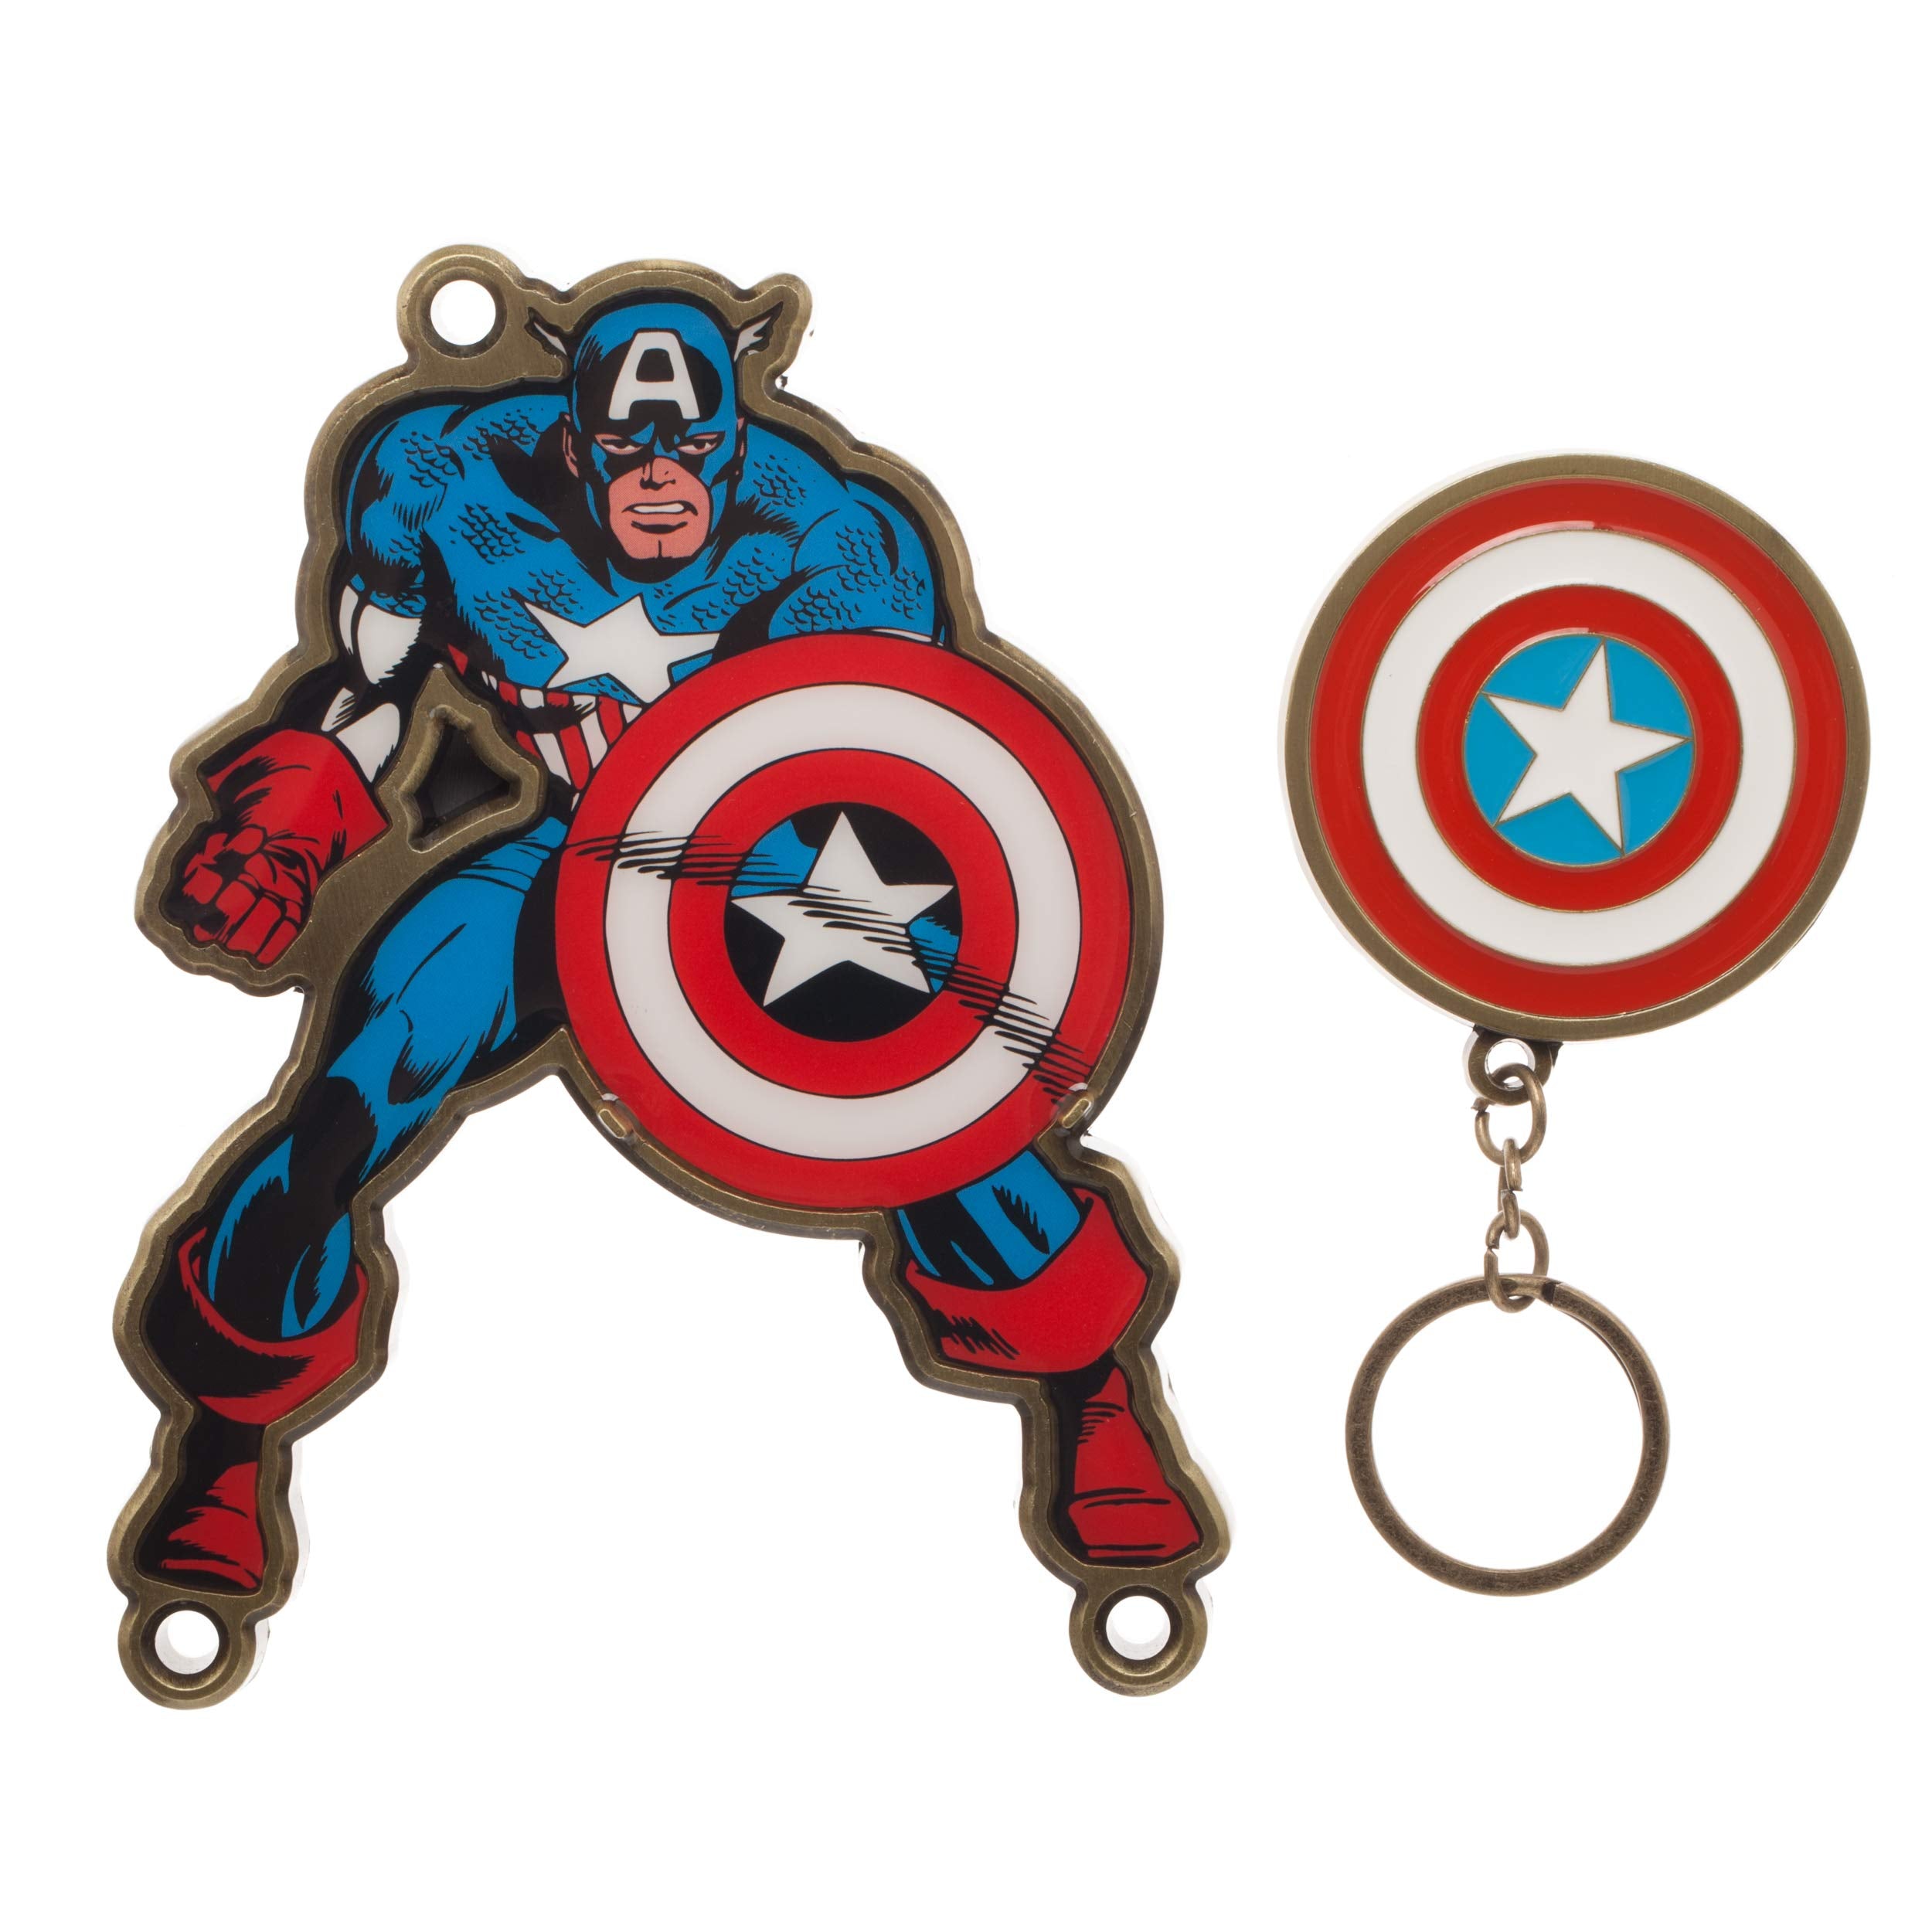 Marvel Captain America Keychain & Magnetic Wall Mount